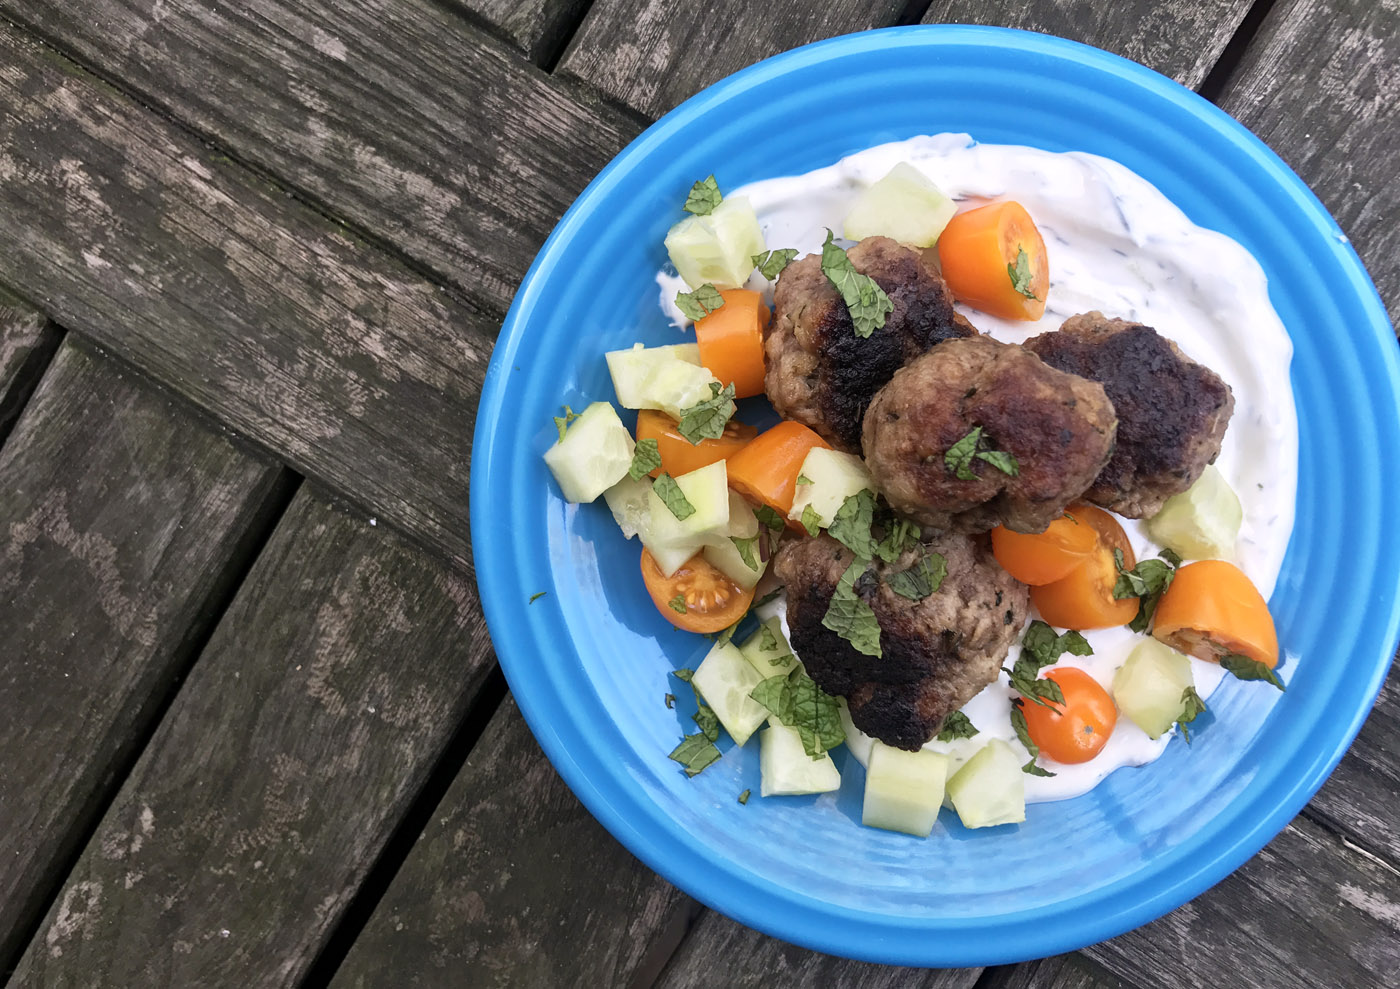 Cool Mom Eats weekly meal plan: 5-Ingredient Greek-Style Meatballs at Stacie Billis (aka One Hungry Mama) on YouTube